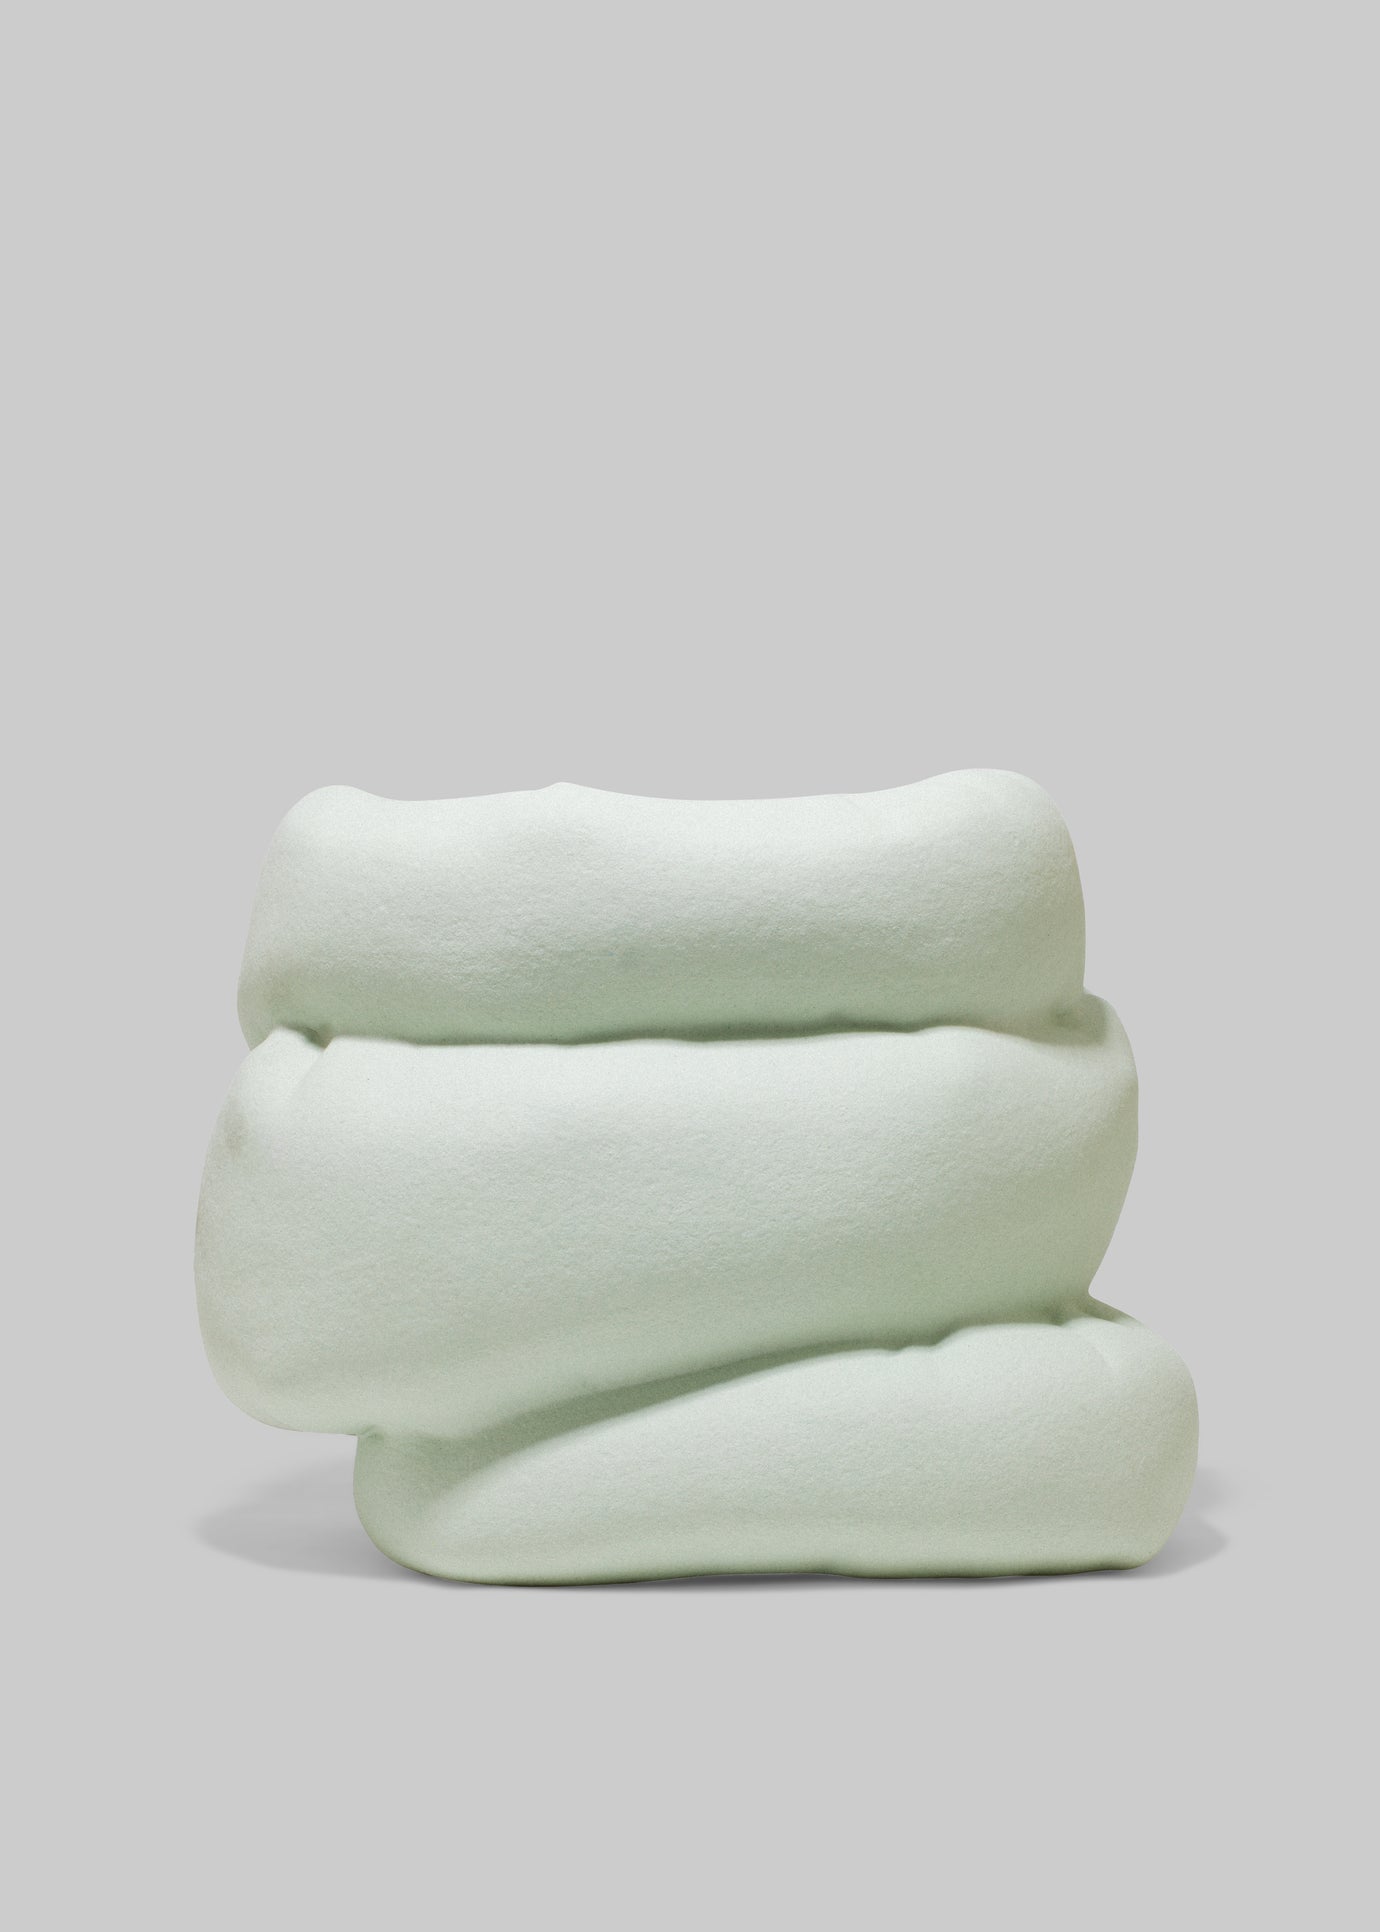 Completedworks Inflated Large Vessel - Textured Mint